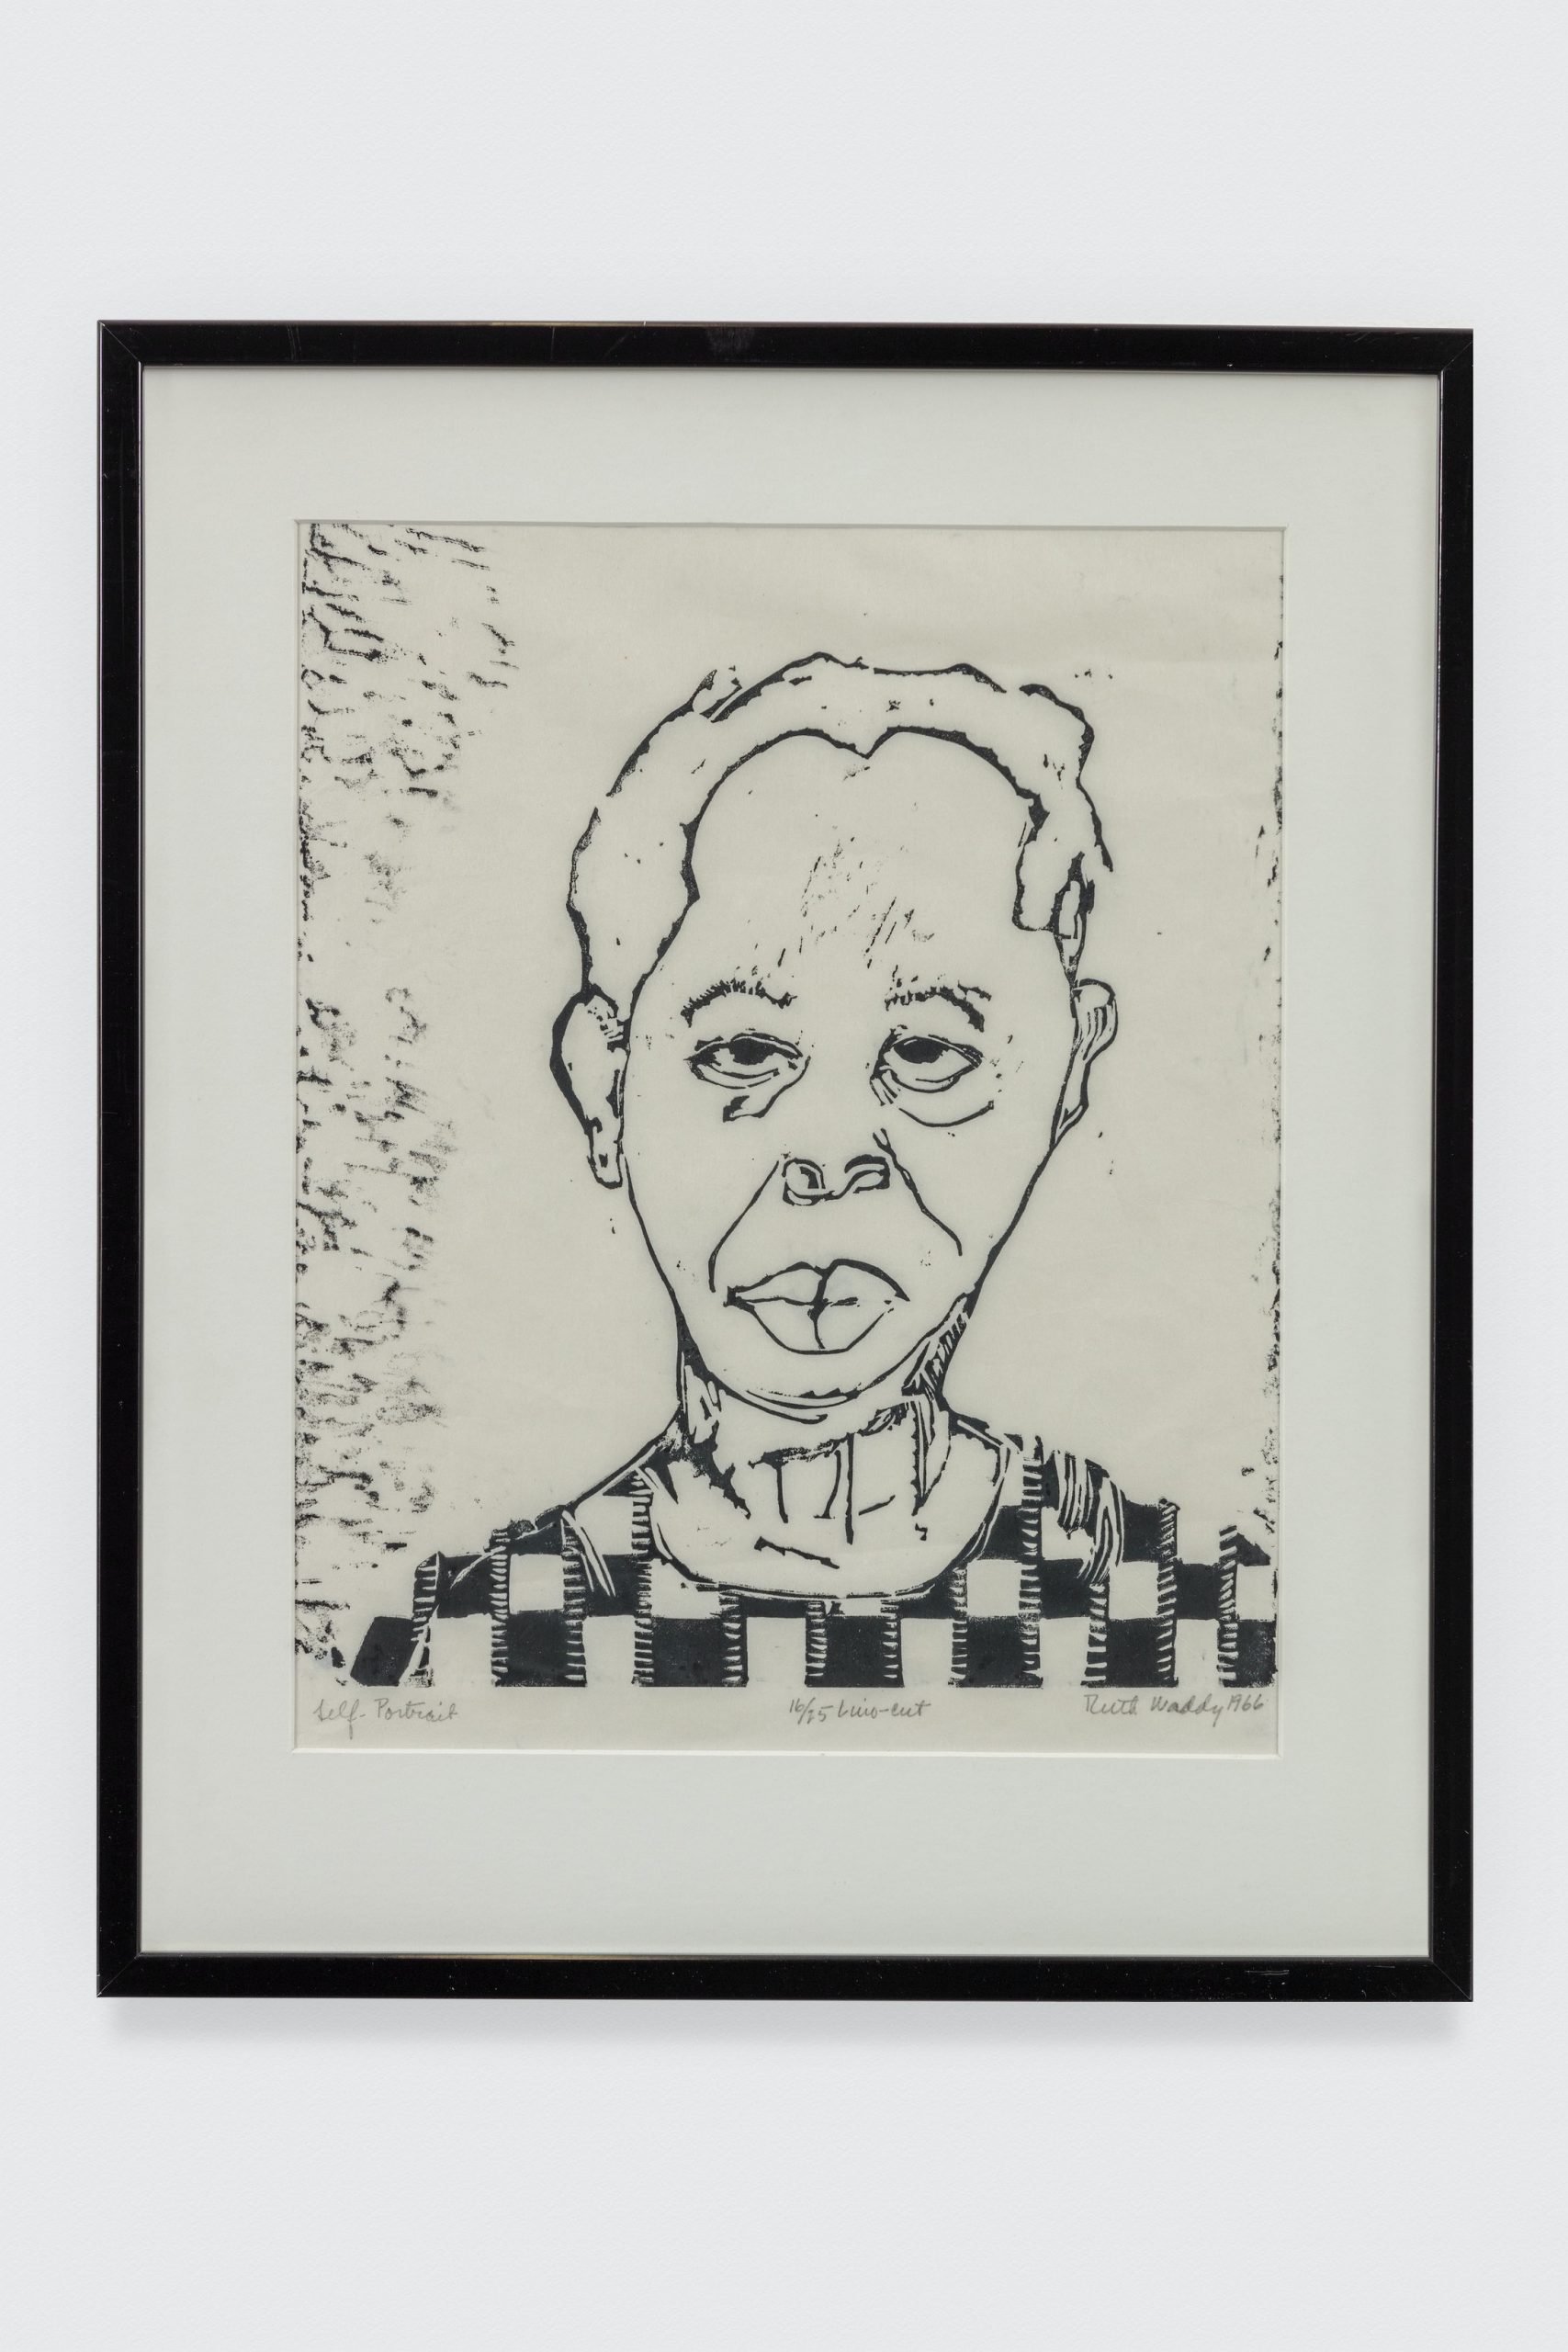 Ruth Waddy, Self Portrait, 1966. Lino-cut print. 23 x 19 3/4 in. © Ruth Waddy. The Eileen Harris Norton Collection. Photo: Charles White.